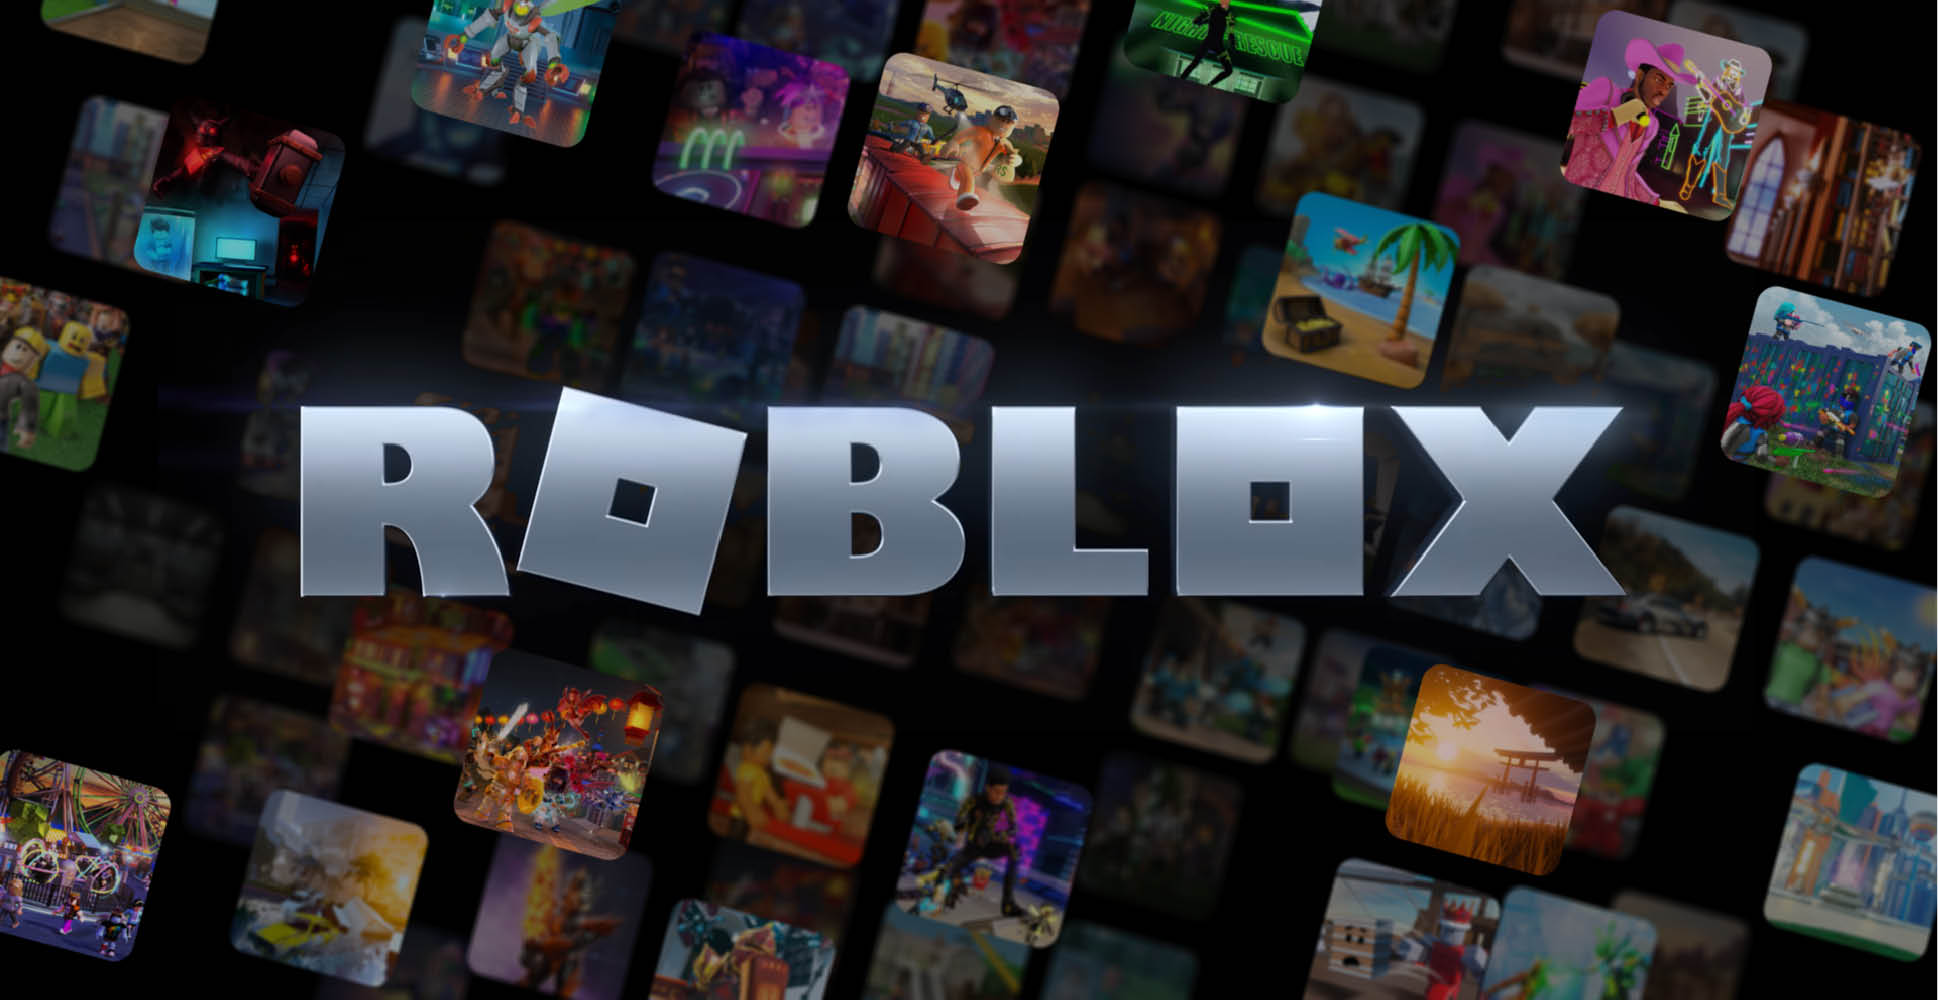 Destroy The Noob's Home - Roblox